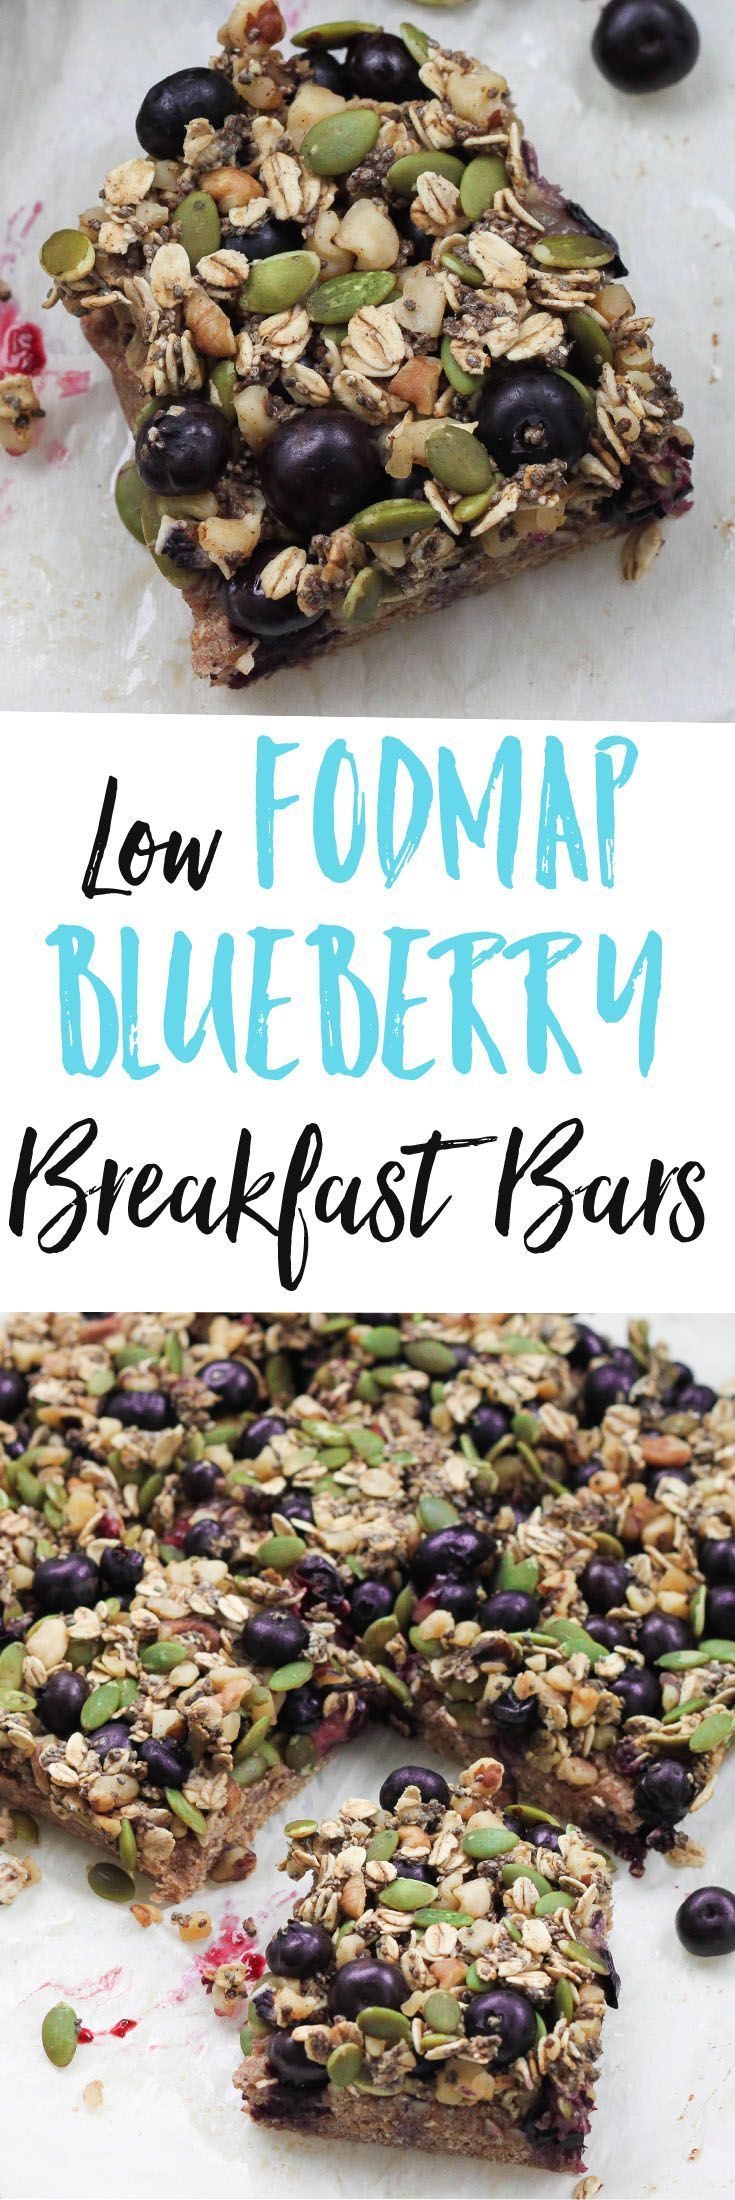 Your IBS elimination phase is easy with these Low FODMAP Blueberry Breakfast Bars, which can also easily be made vegan and gluten